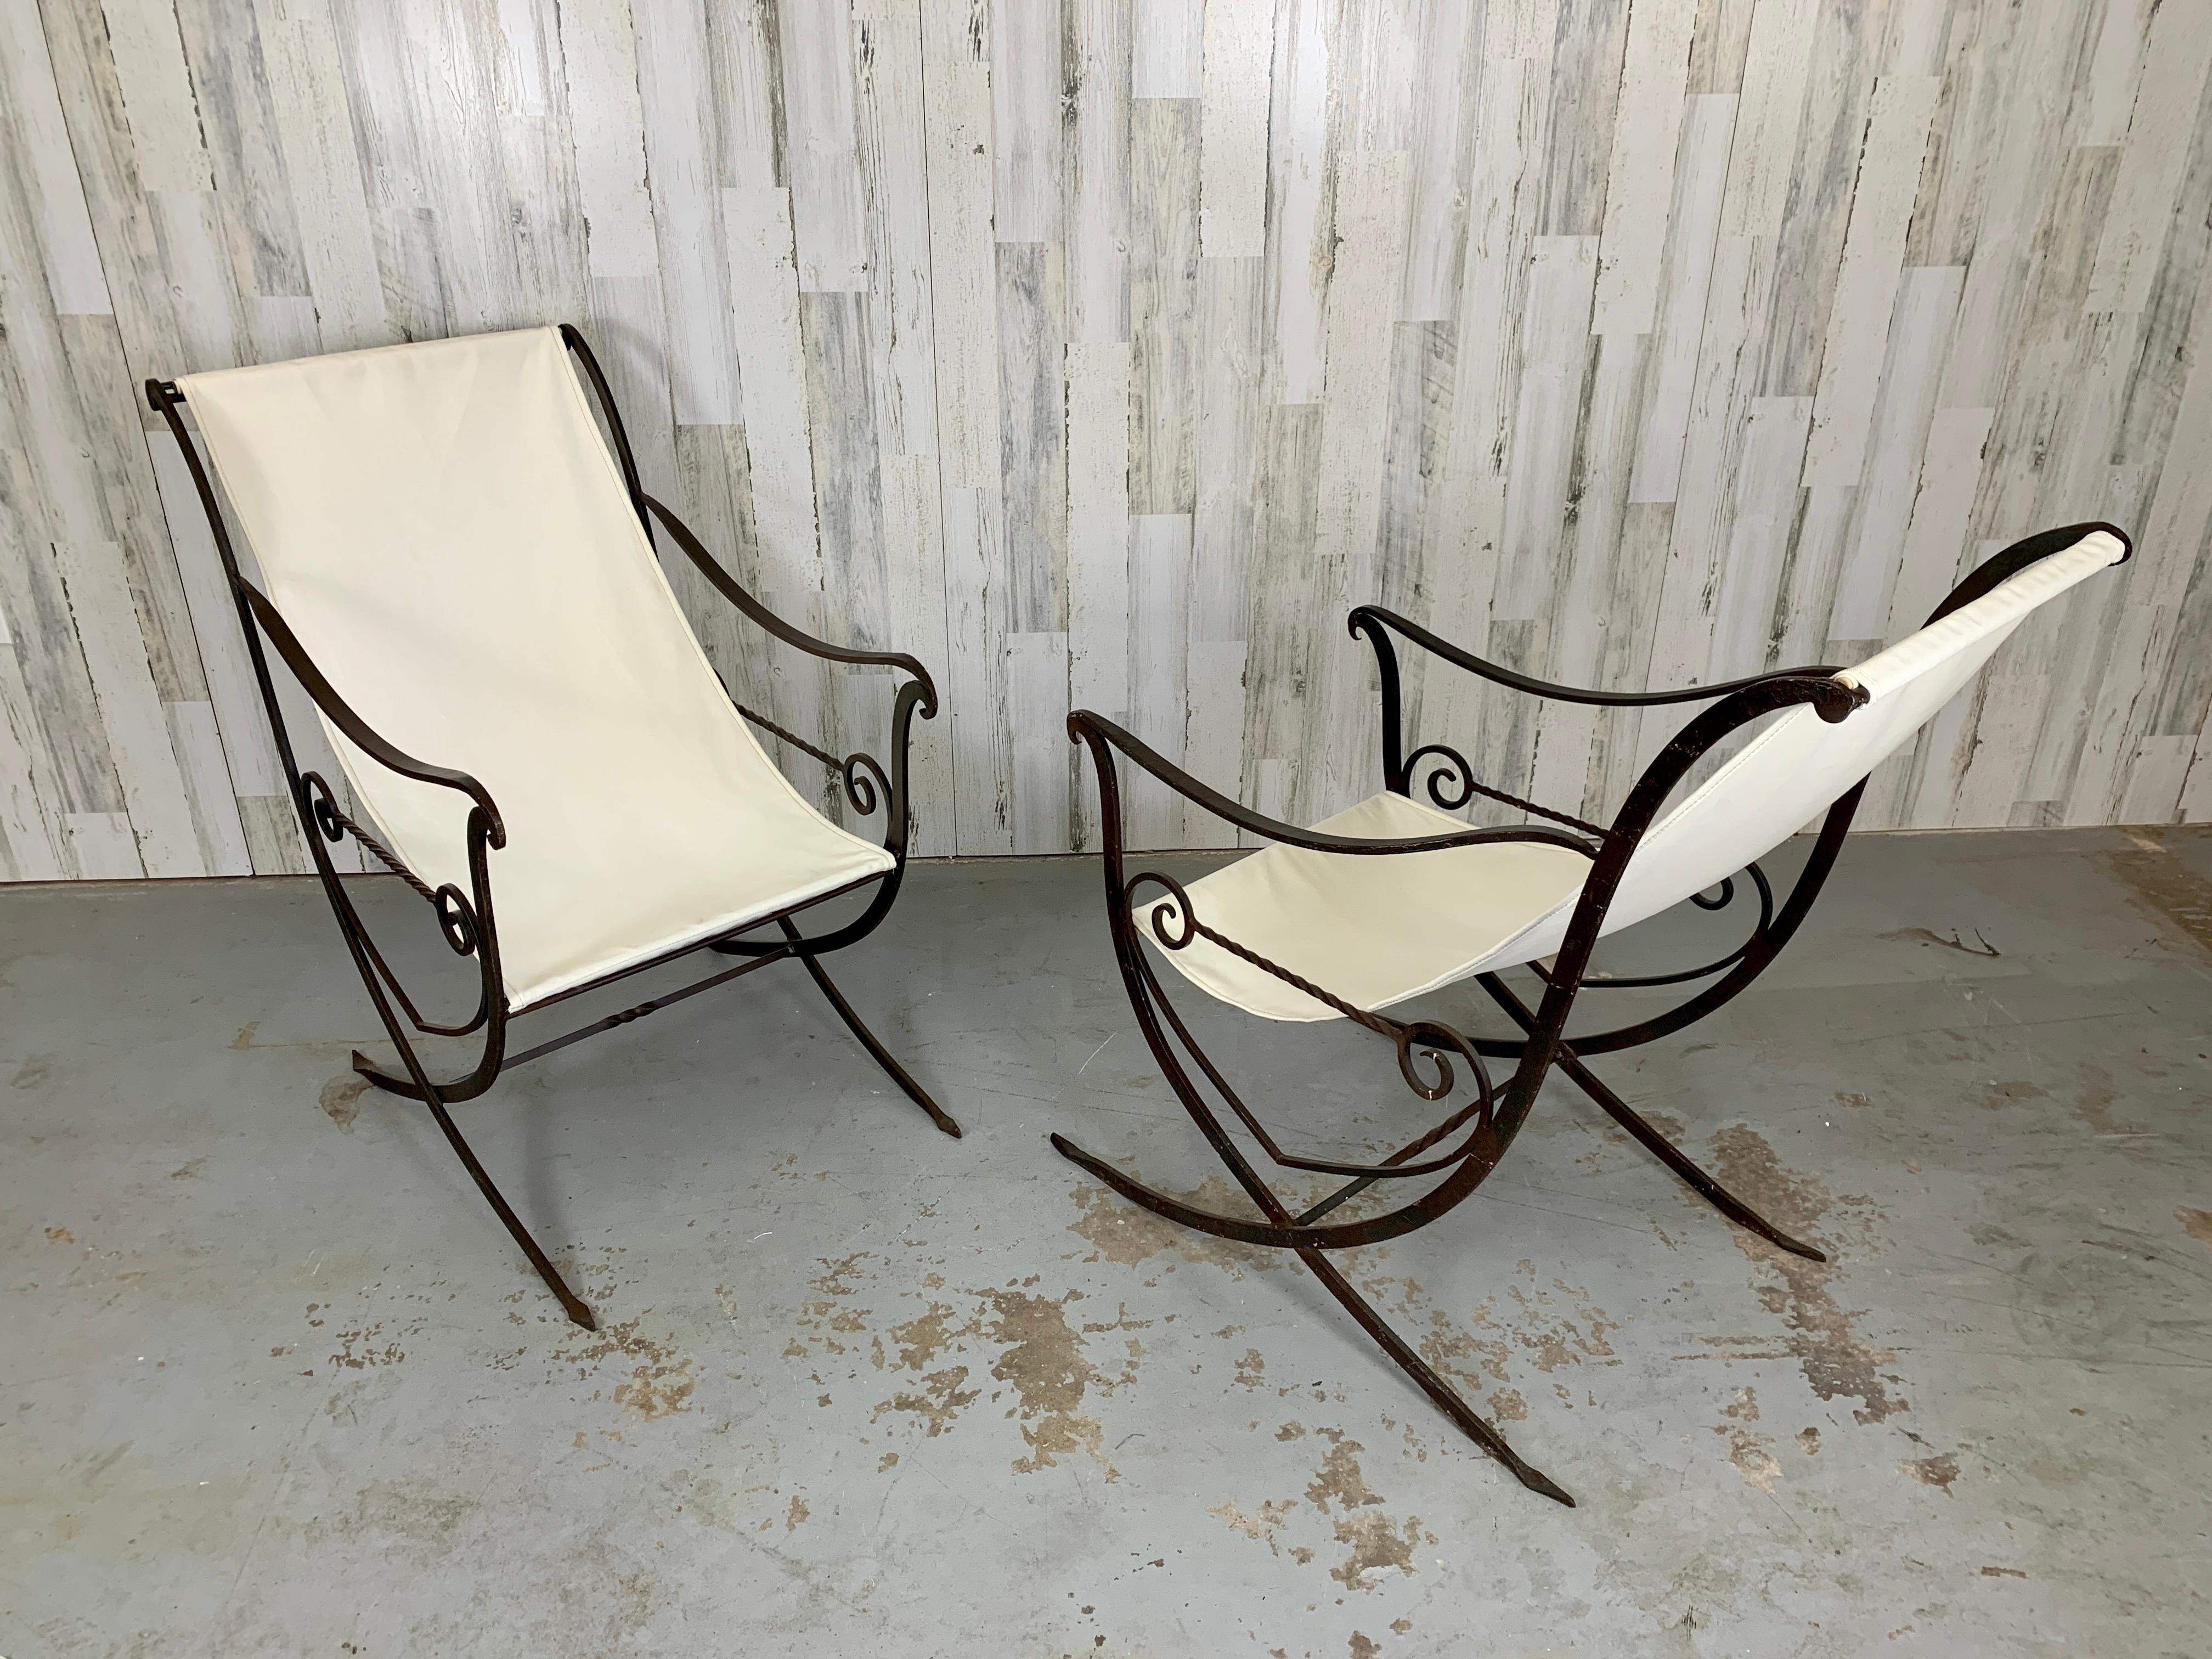 Sculpted Forged Iron Sling Chairs, 1940's For Sale 12